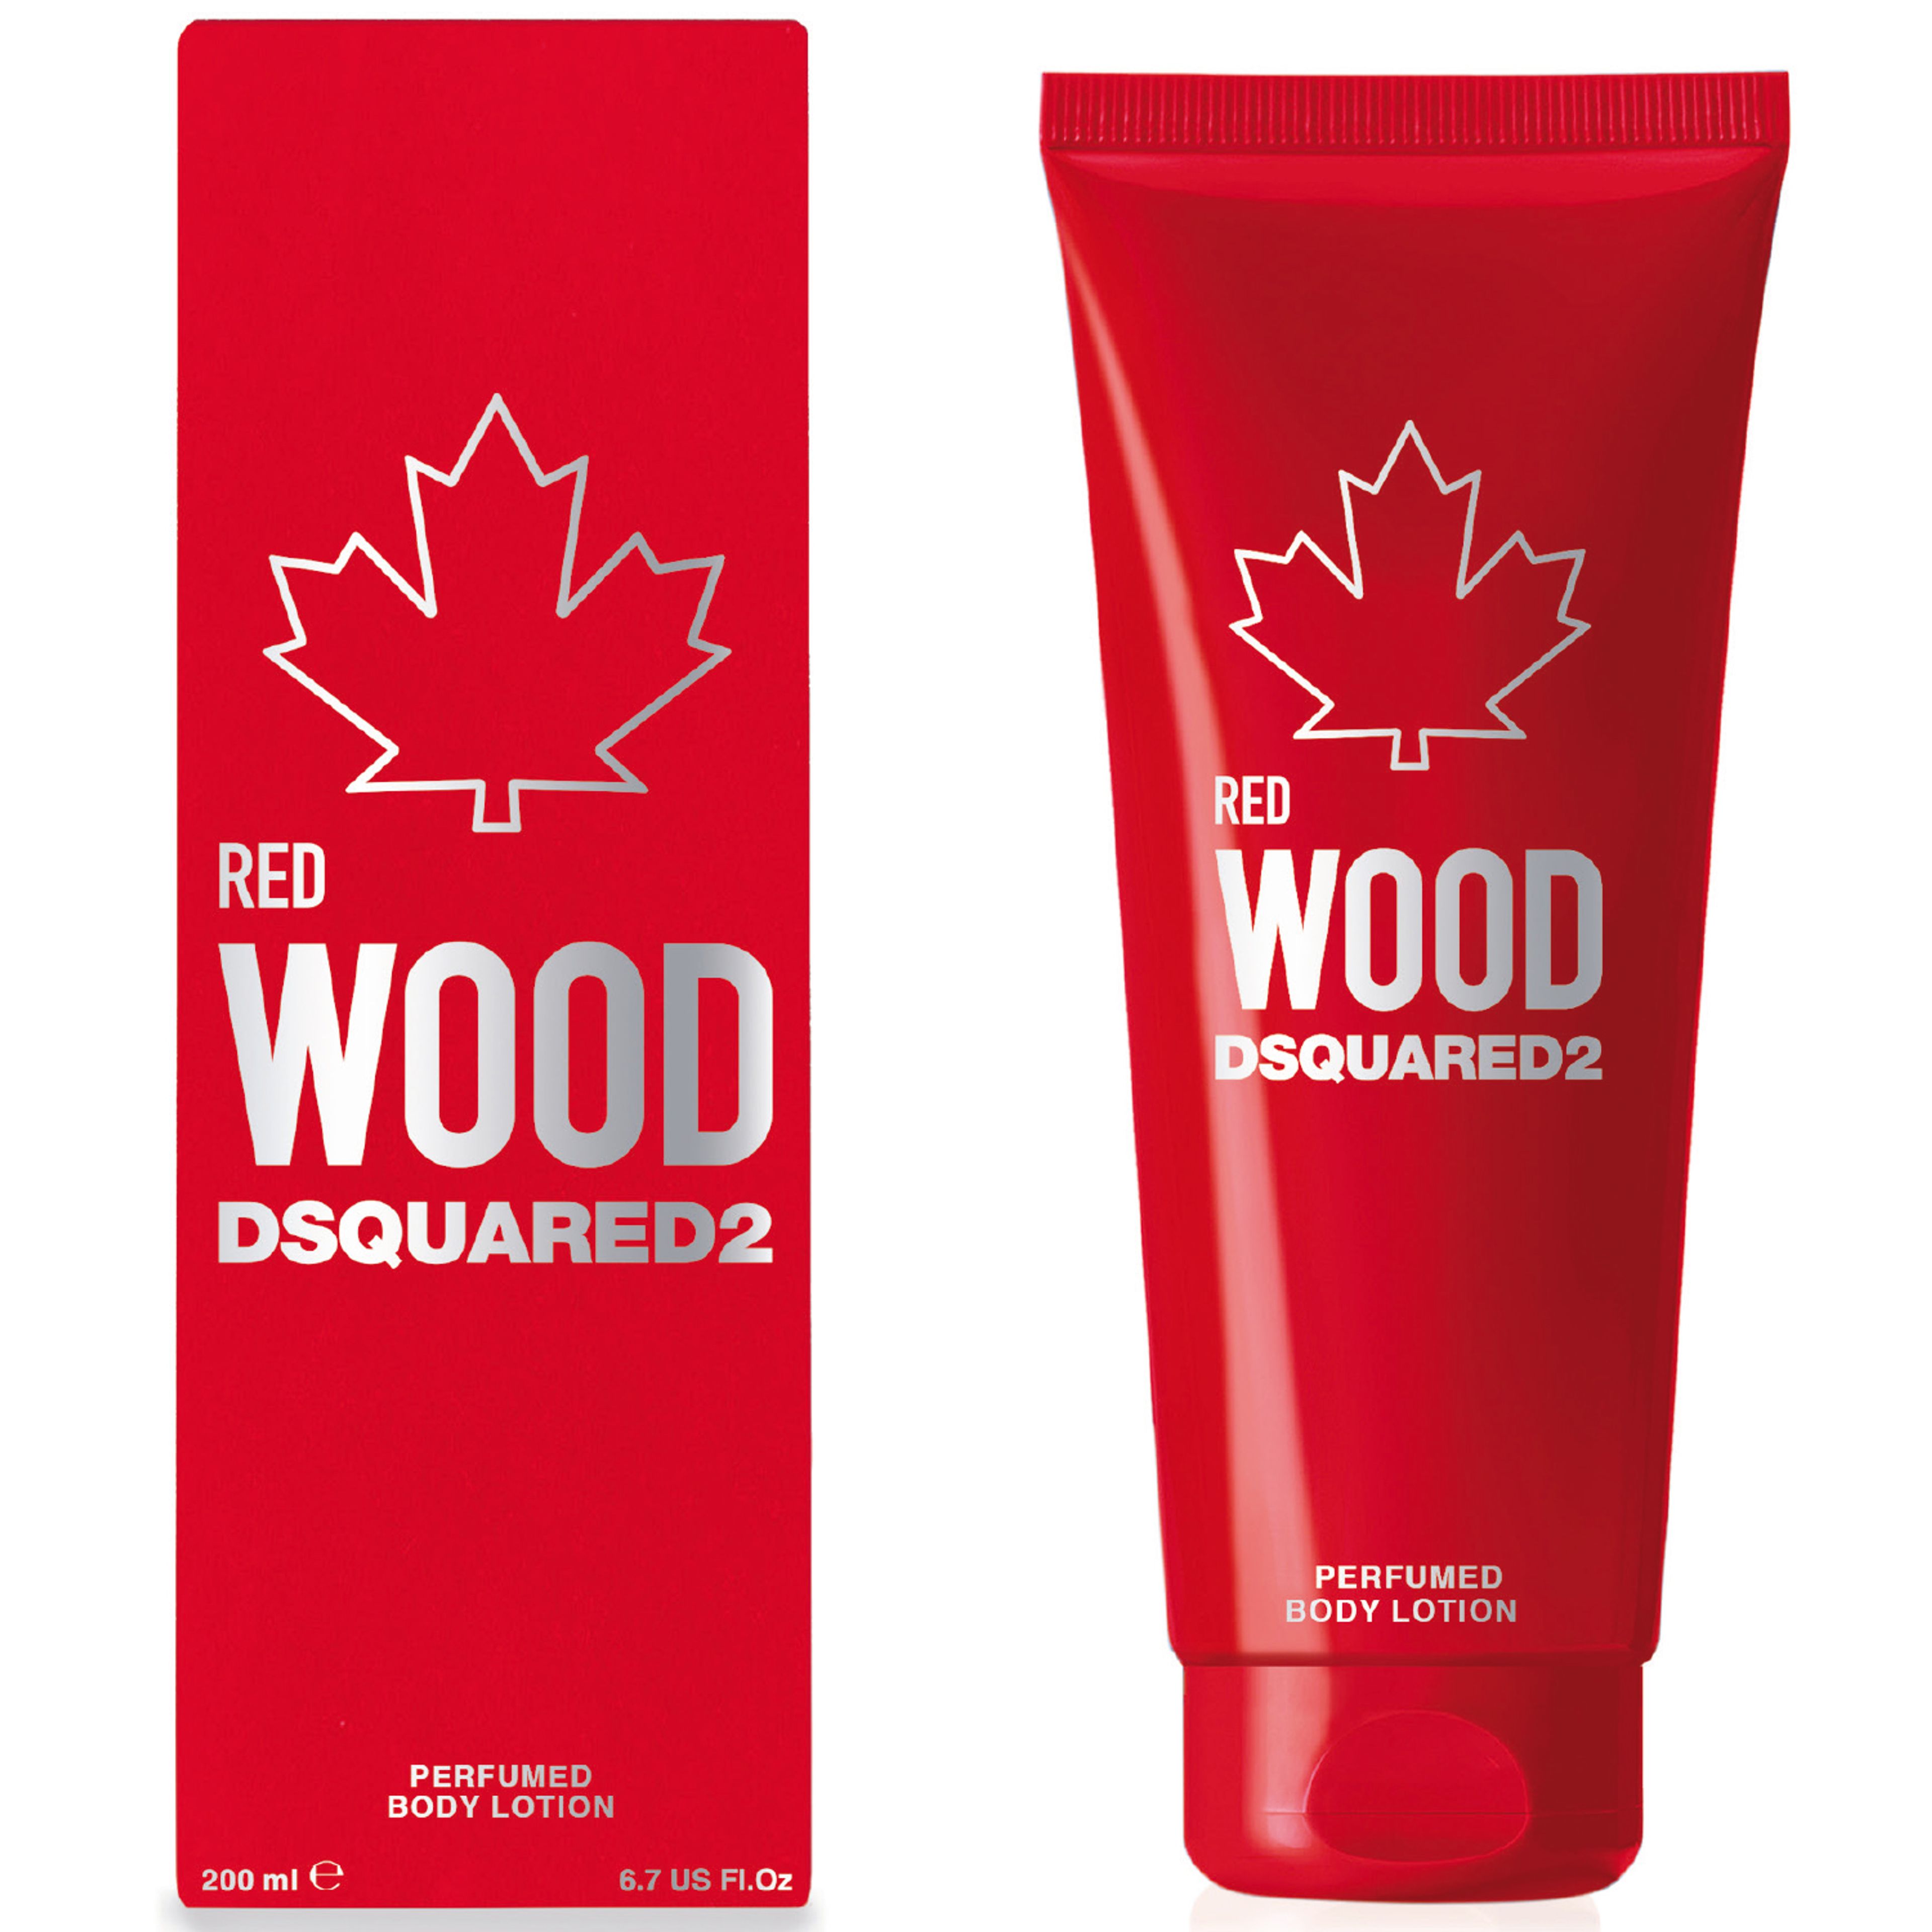 Red Wood Pour Femme Perfumed Body Lotion Dsquared2 2